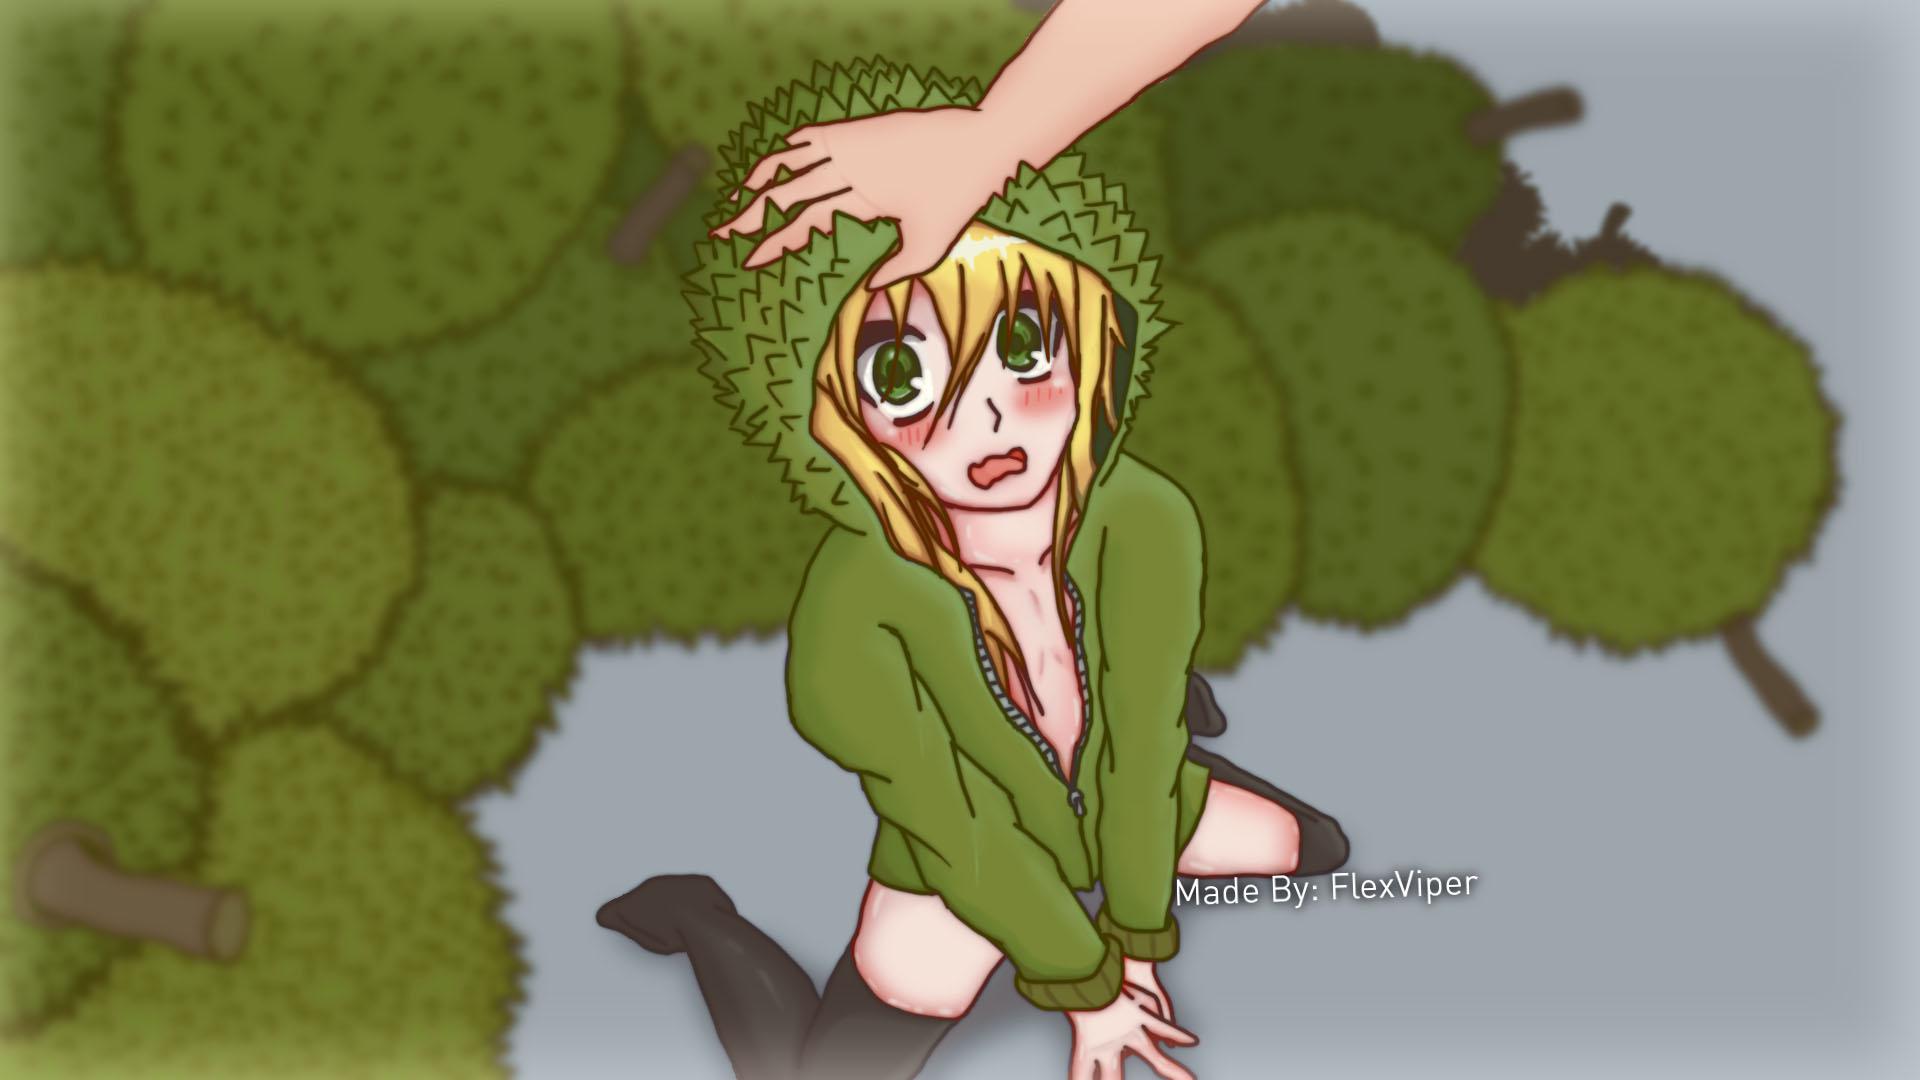 Durian Chan. First time drawing anime girl digitally on photohop